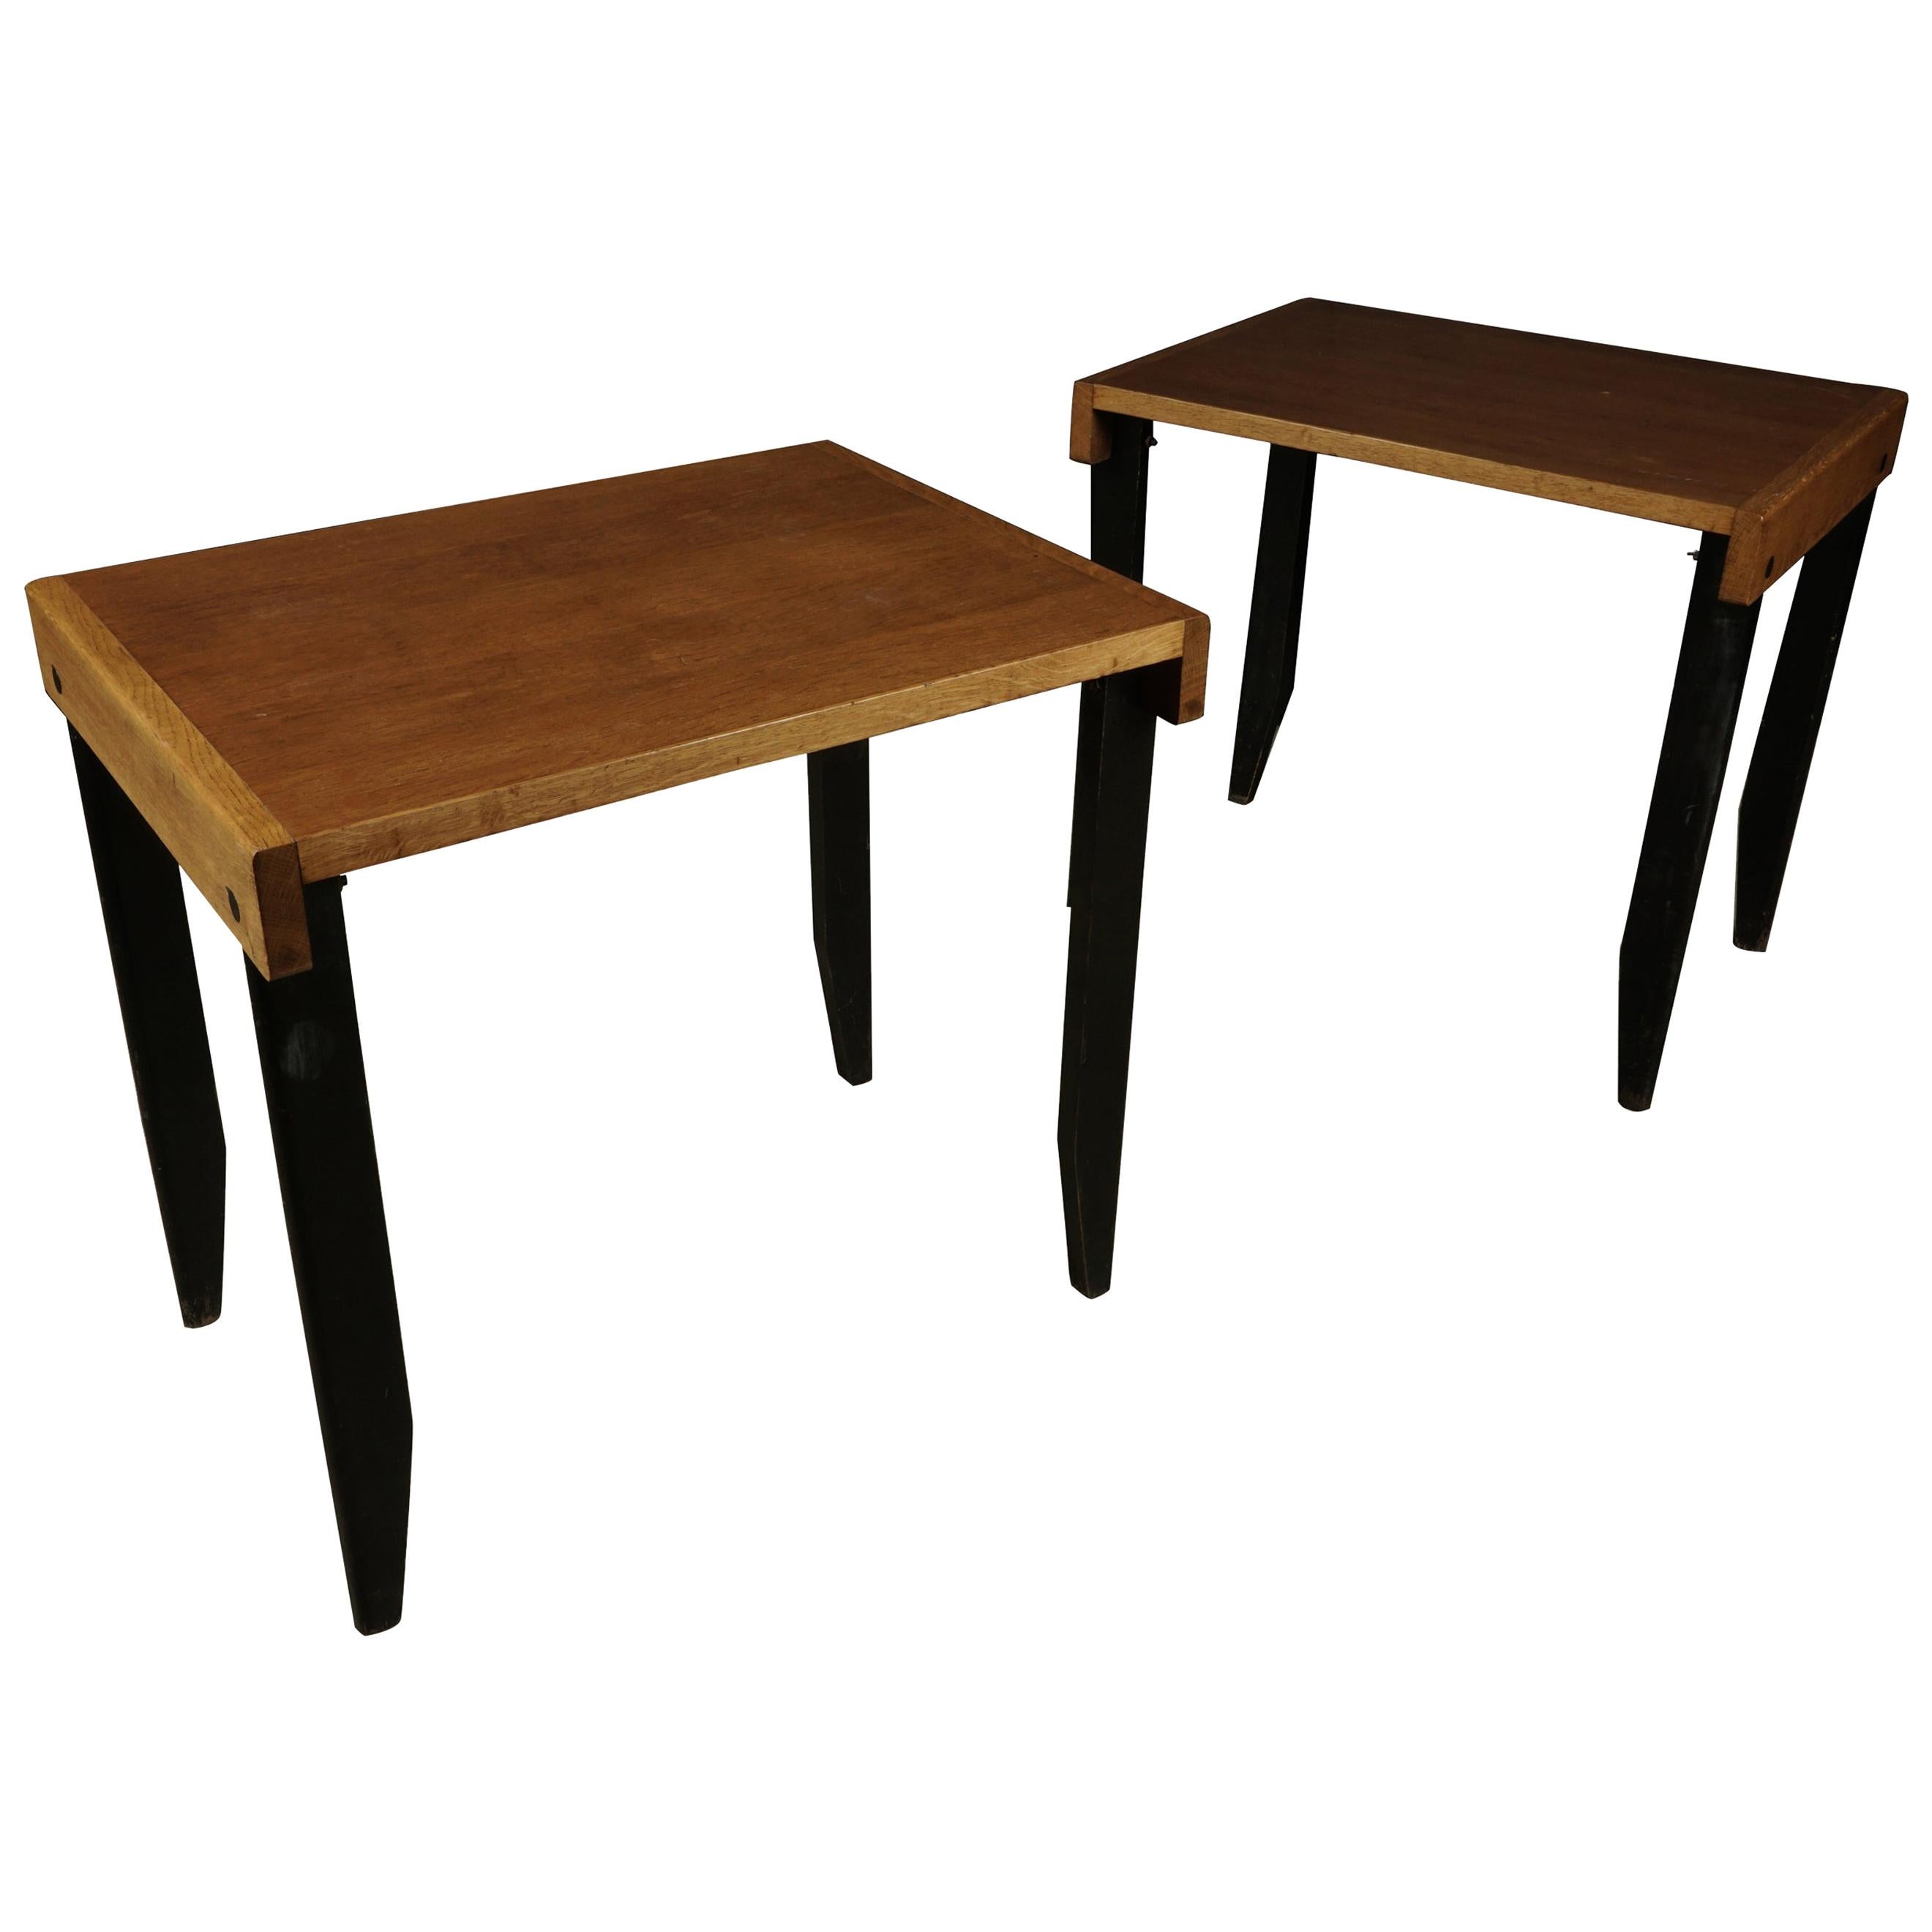 Rare Vintage Pair of Side Tables from France, circa 1960